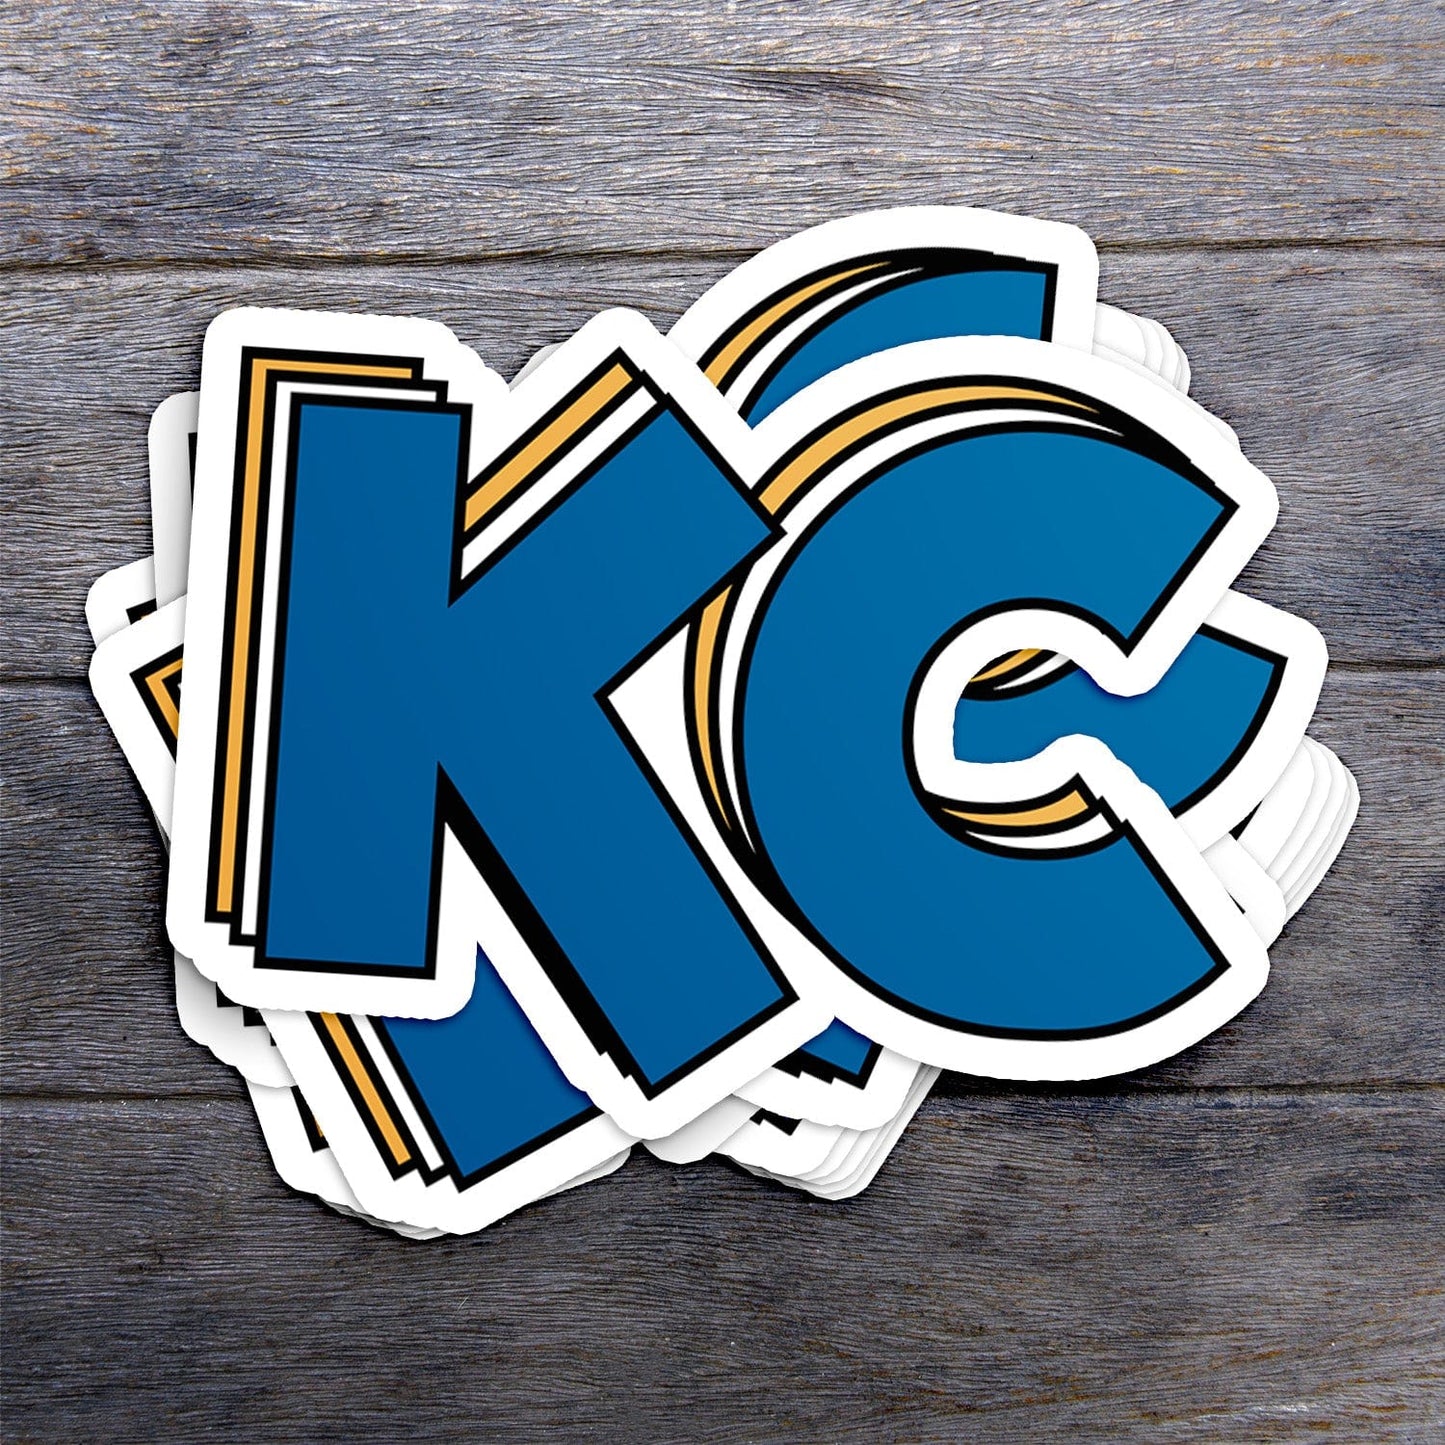 KC Swag Kansas City Royals blue, gold, white Stacked Blue KC vinyl die cut decal sticker stack on dark wood table